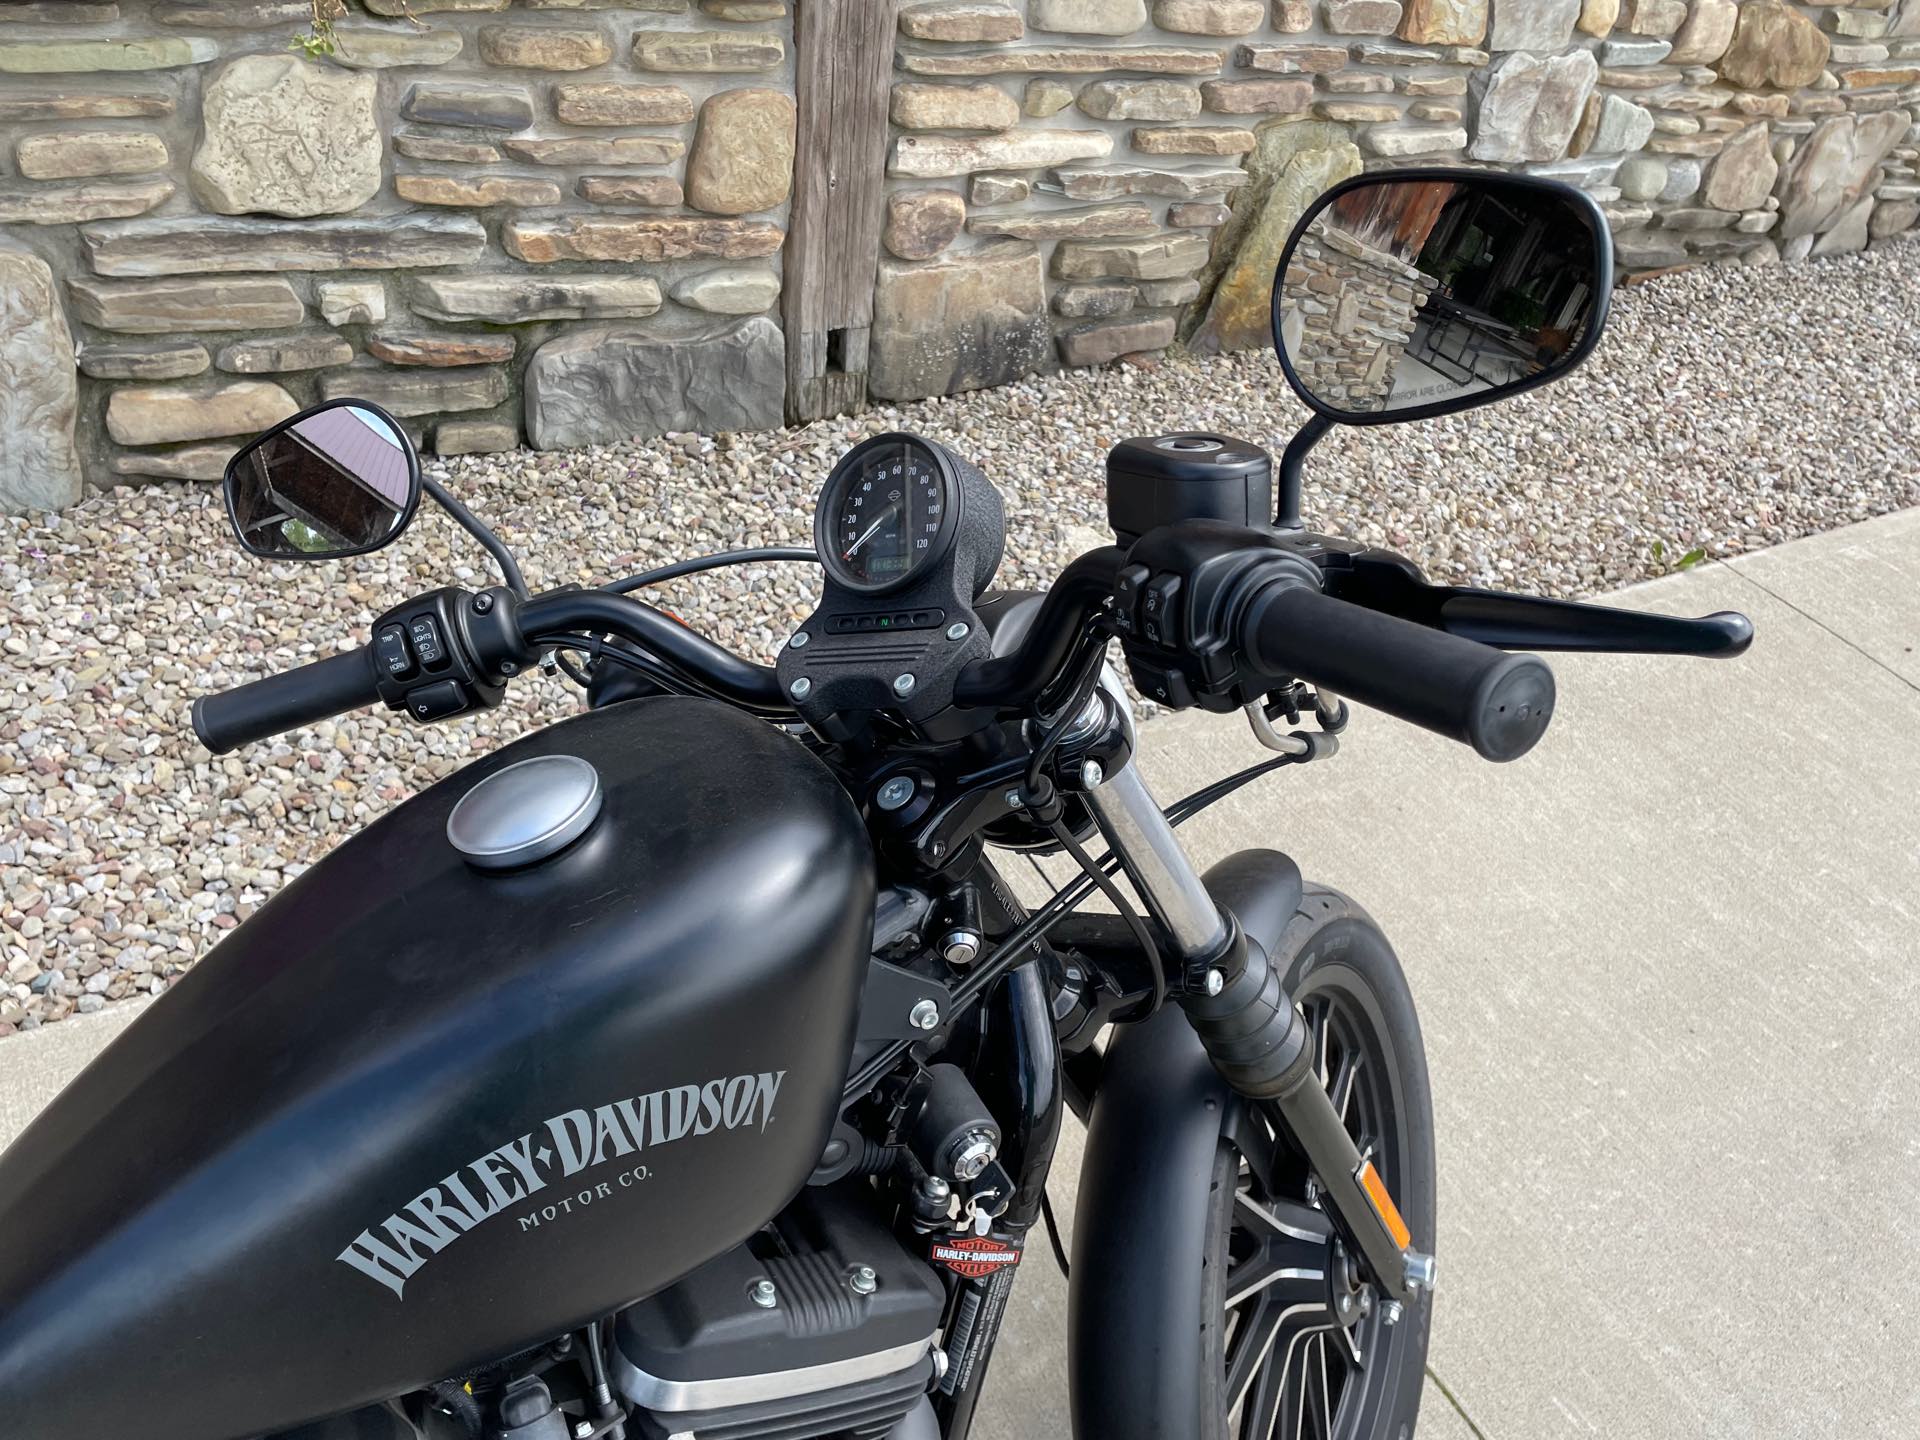 2015 Harley-Davidson Sportster Iron 883 at Arkport Cycles